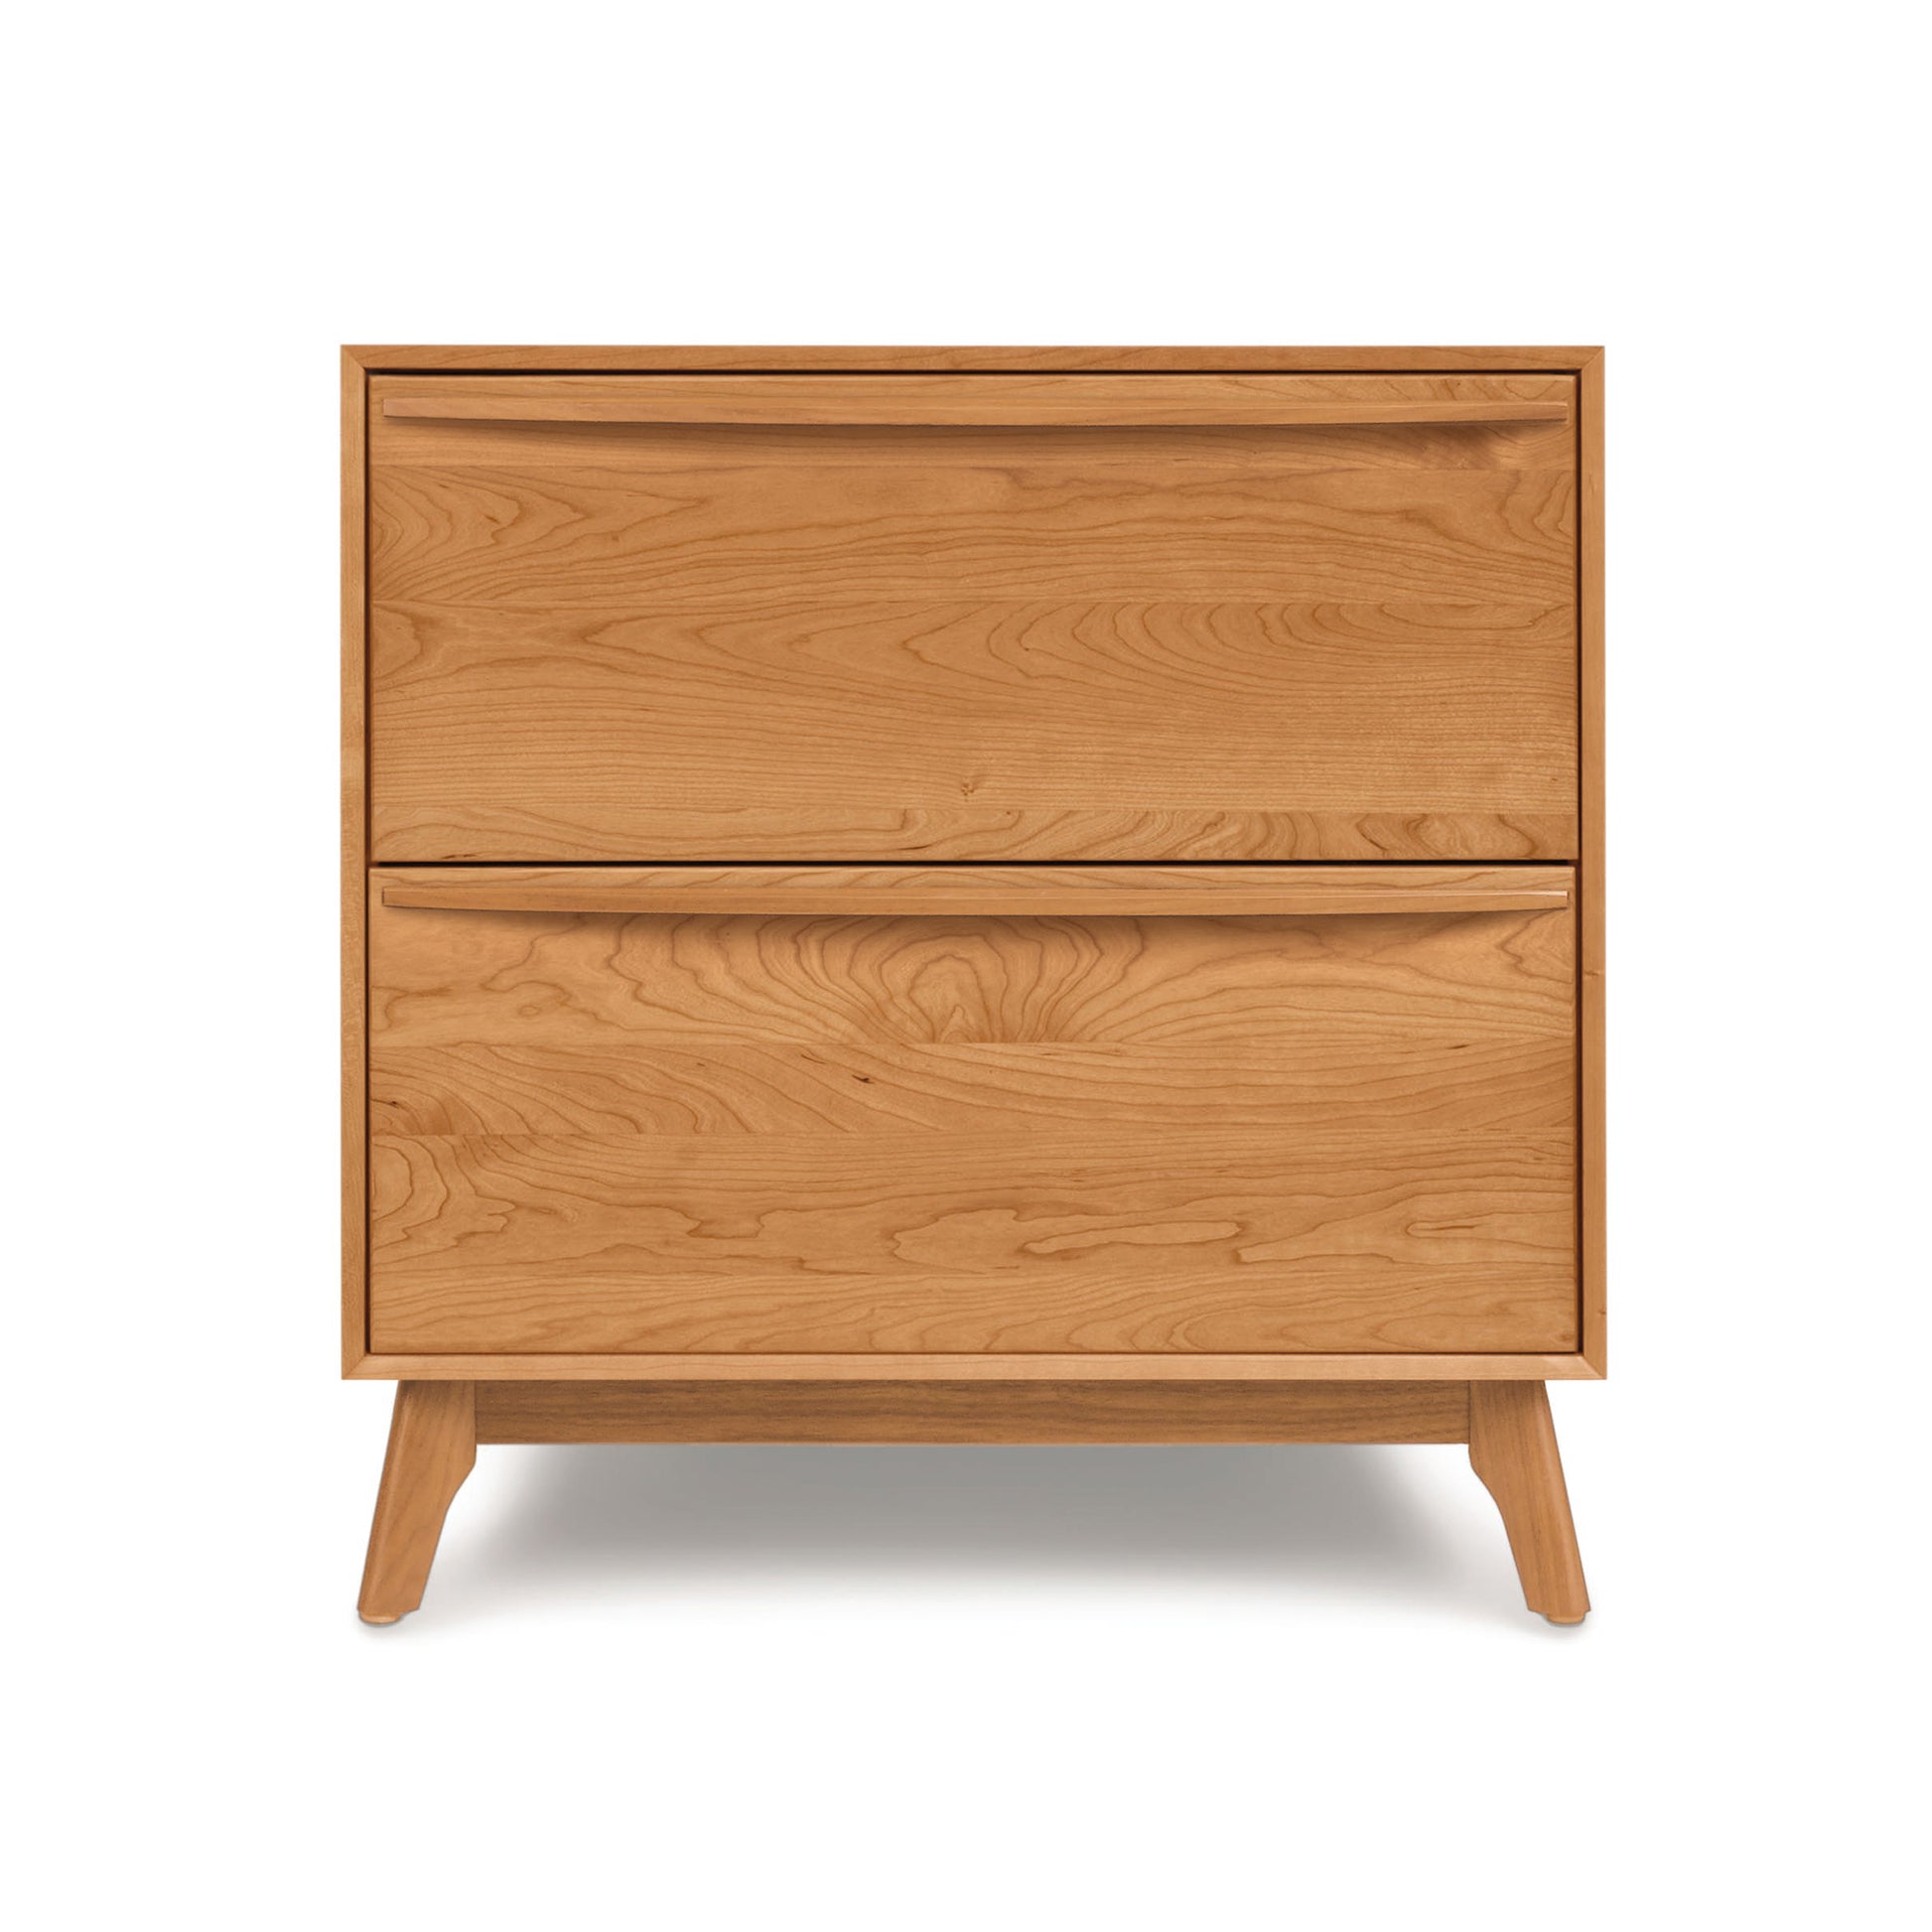 The Catalina 2-Drawer Nightstand by Copeland Furniture is a contemporary style wooden nightstand handmade in Bradford. It features two drawers and is displayed on a white background.